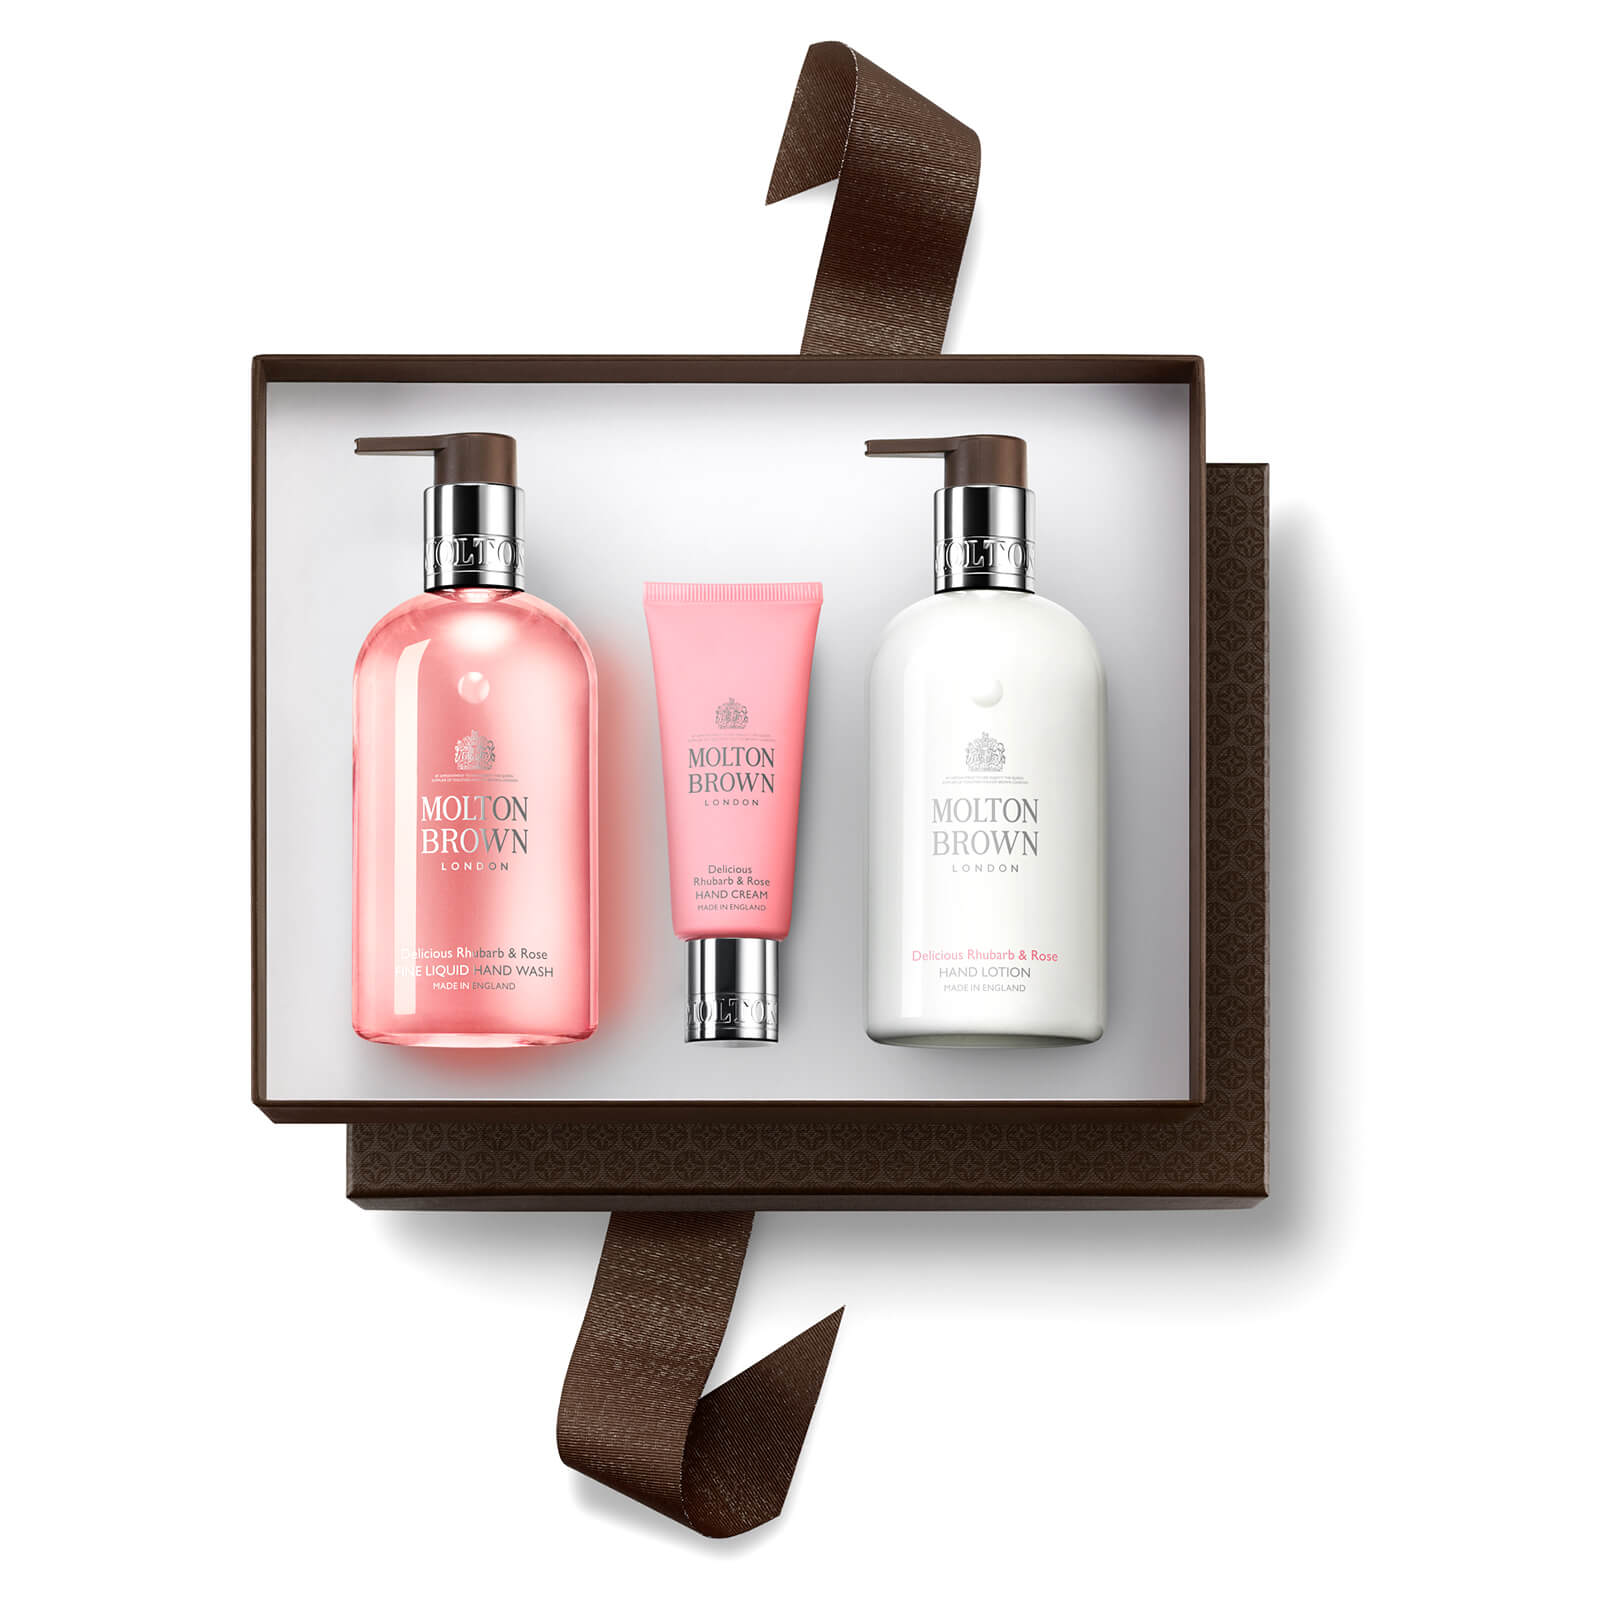 Molton Brown Delicious Rhubarb & Rose Hand Gift Set